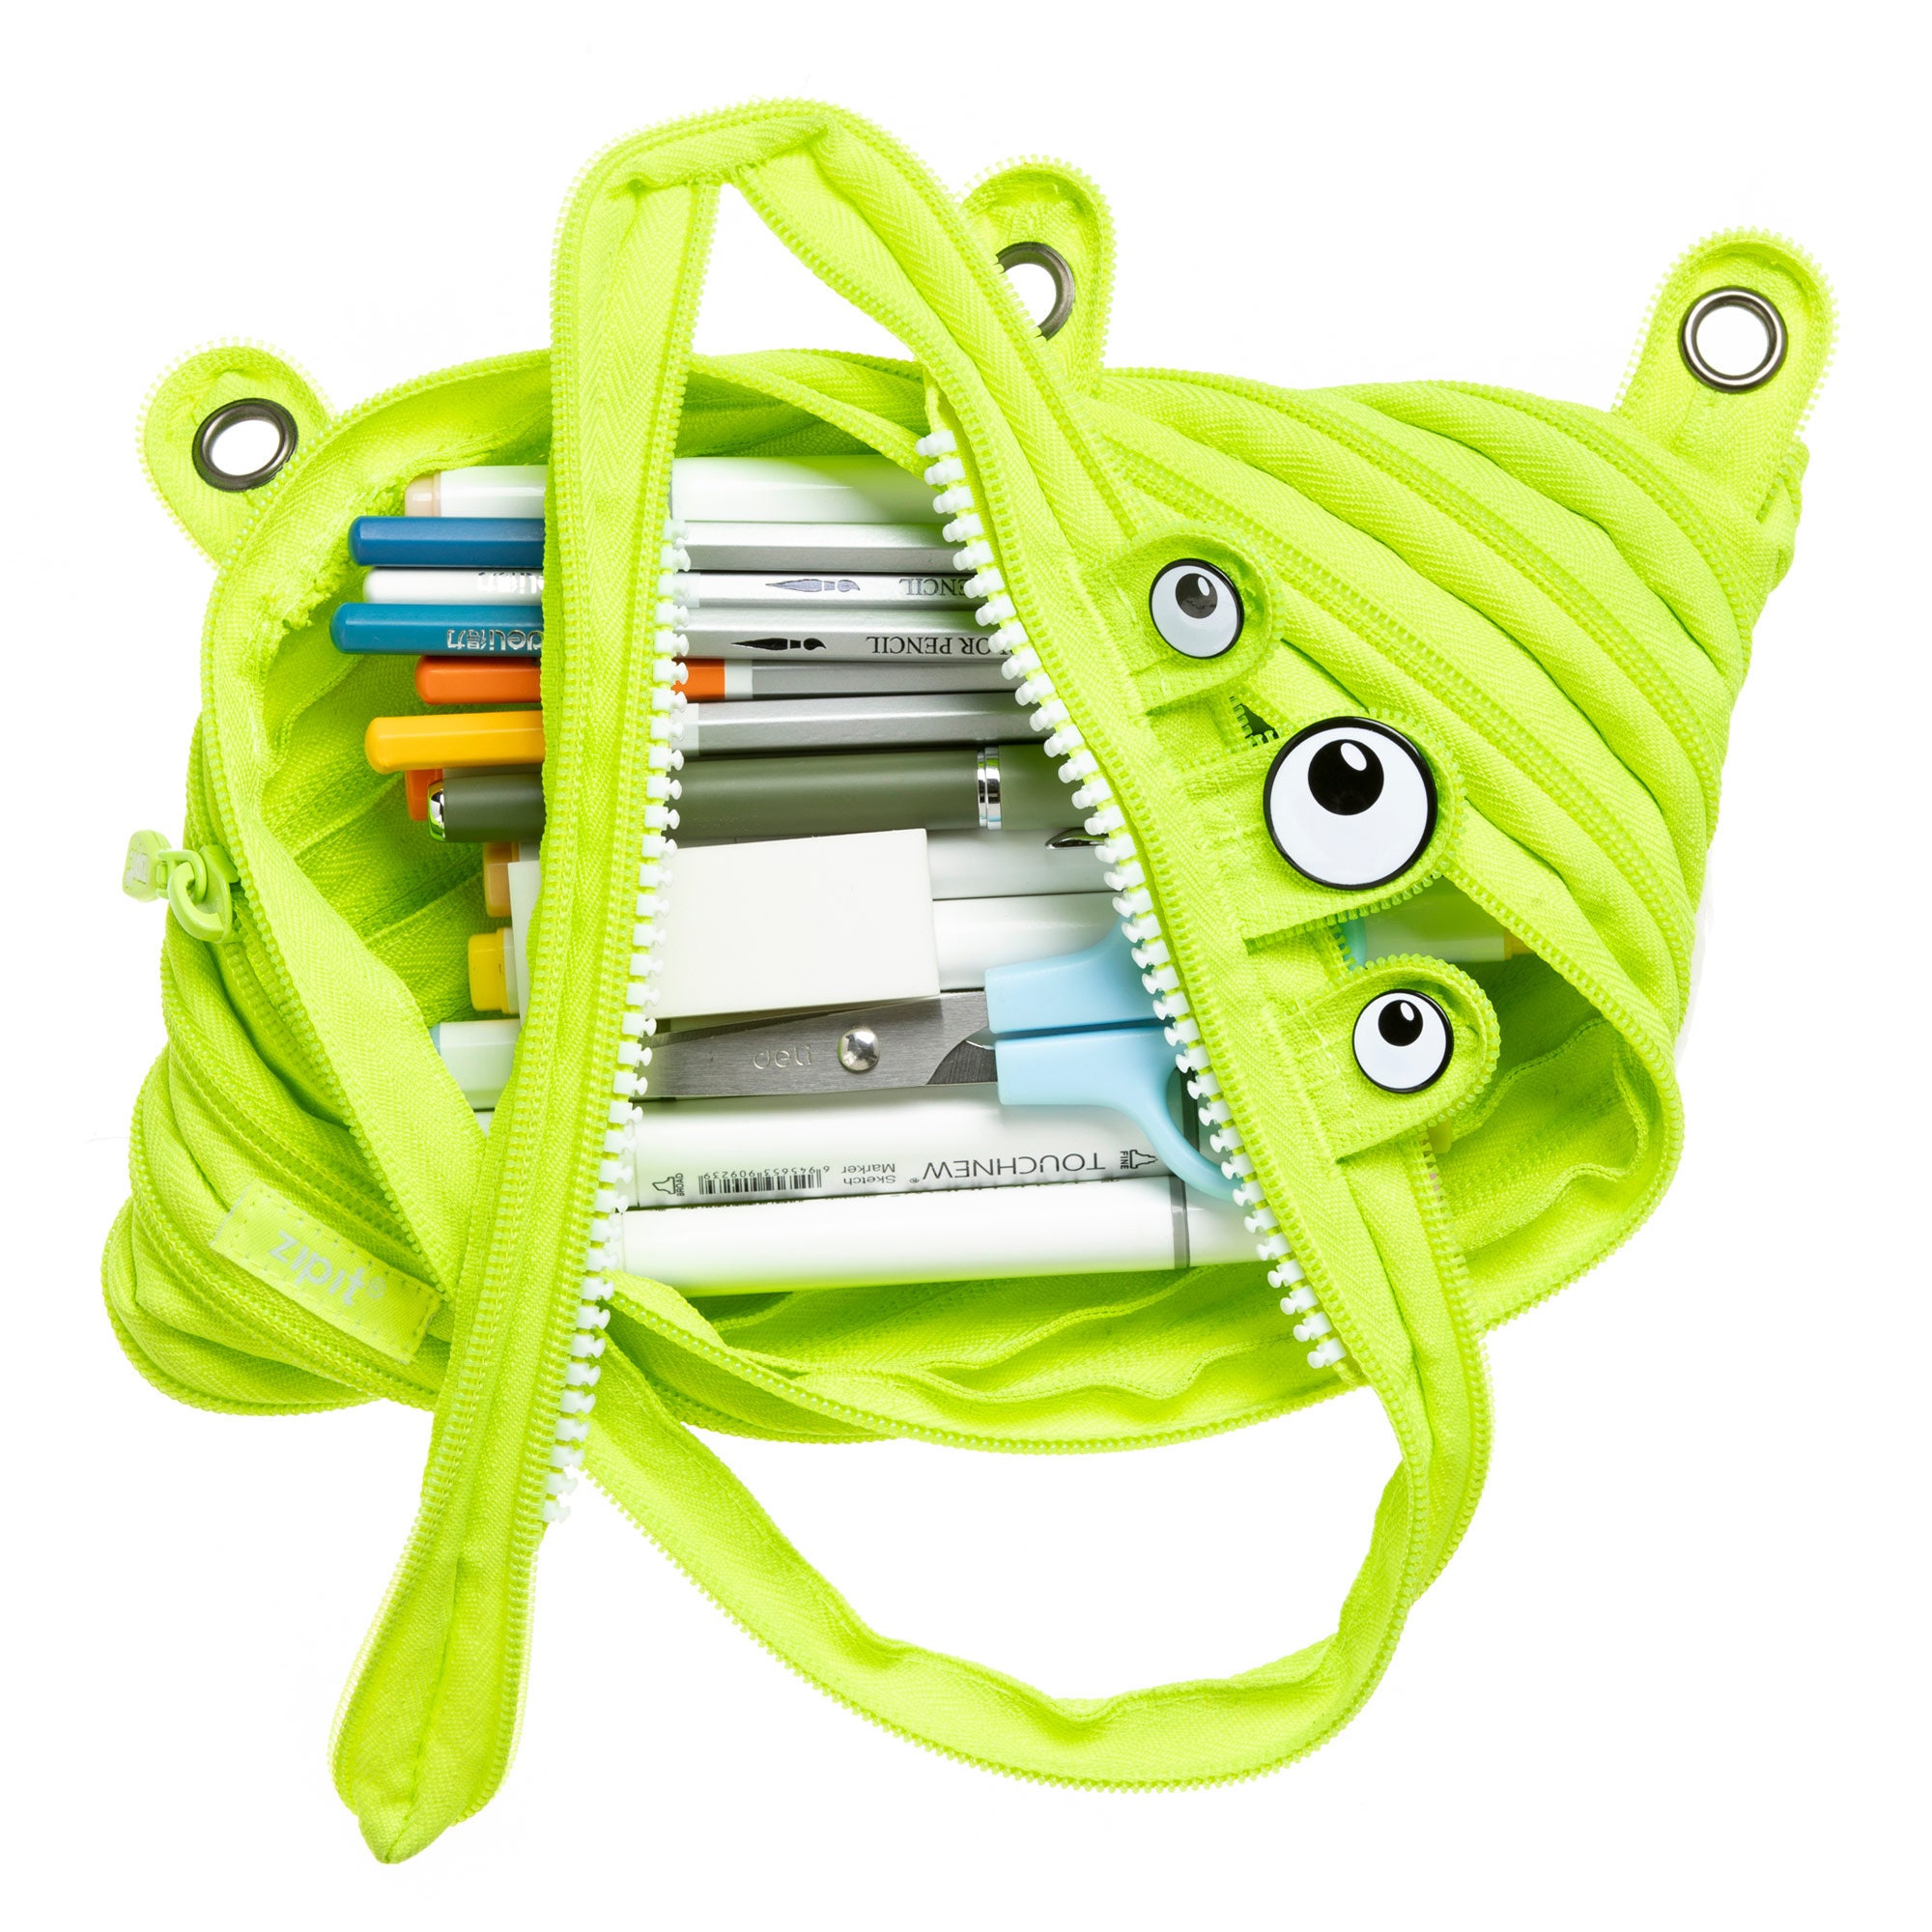 Monster Pencil Case, Pouch, Made by ZIPIT 